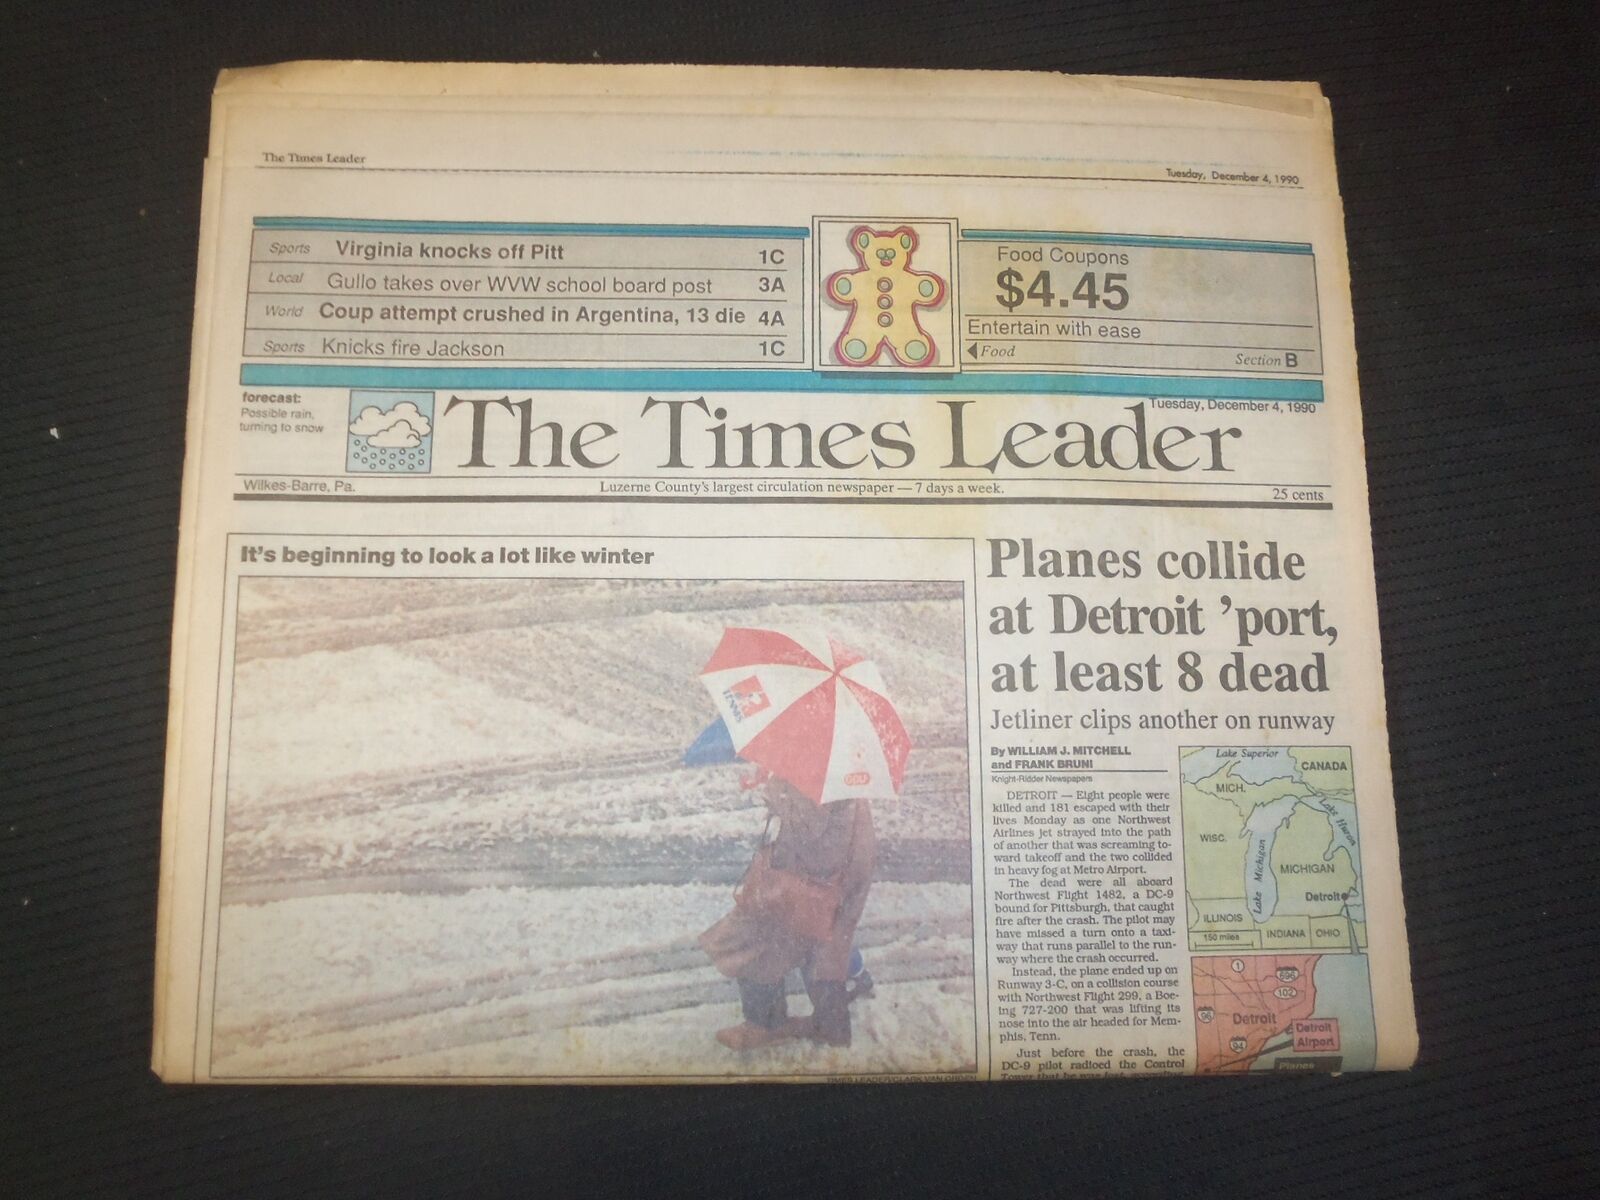 1990 DEC 4 WILKES-BARRE TIMES LEADER -PLANES COLLIDE AT DETROIT AIRPORT- NP 7524